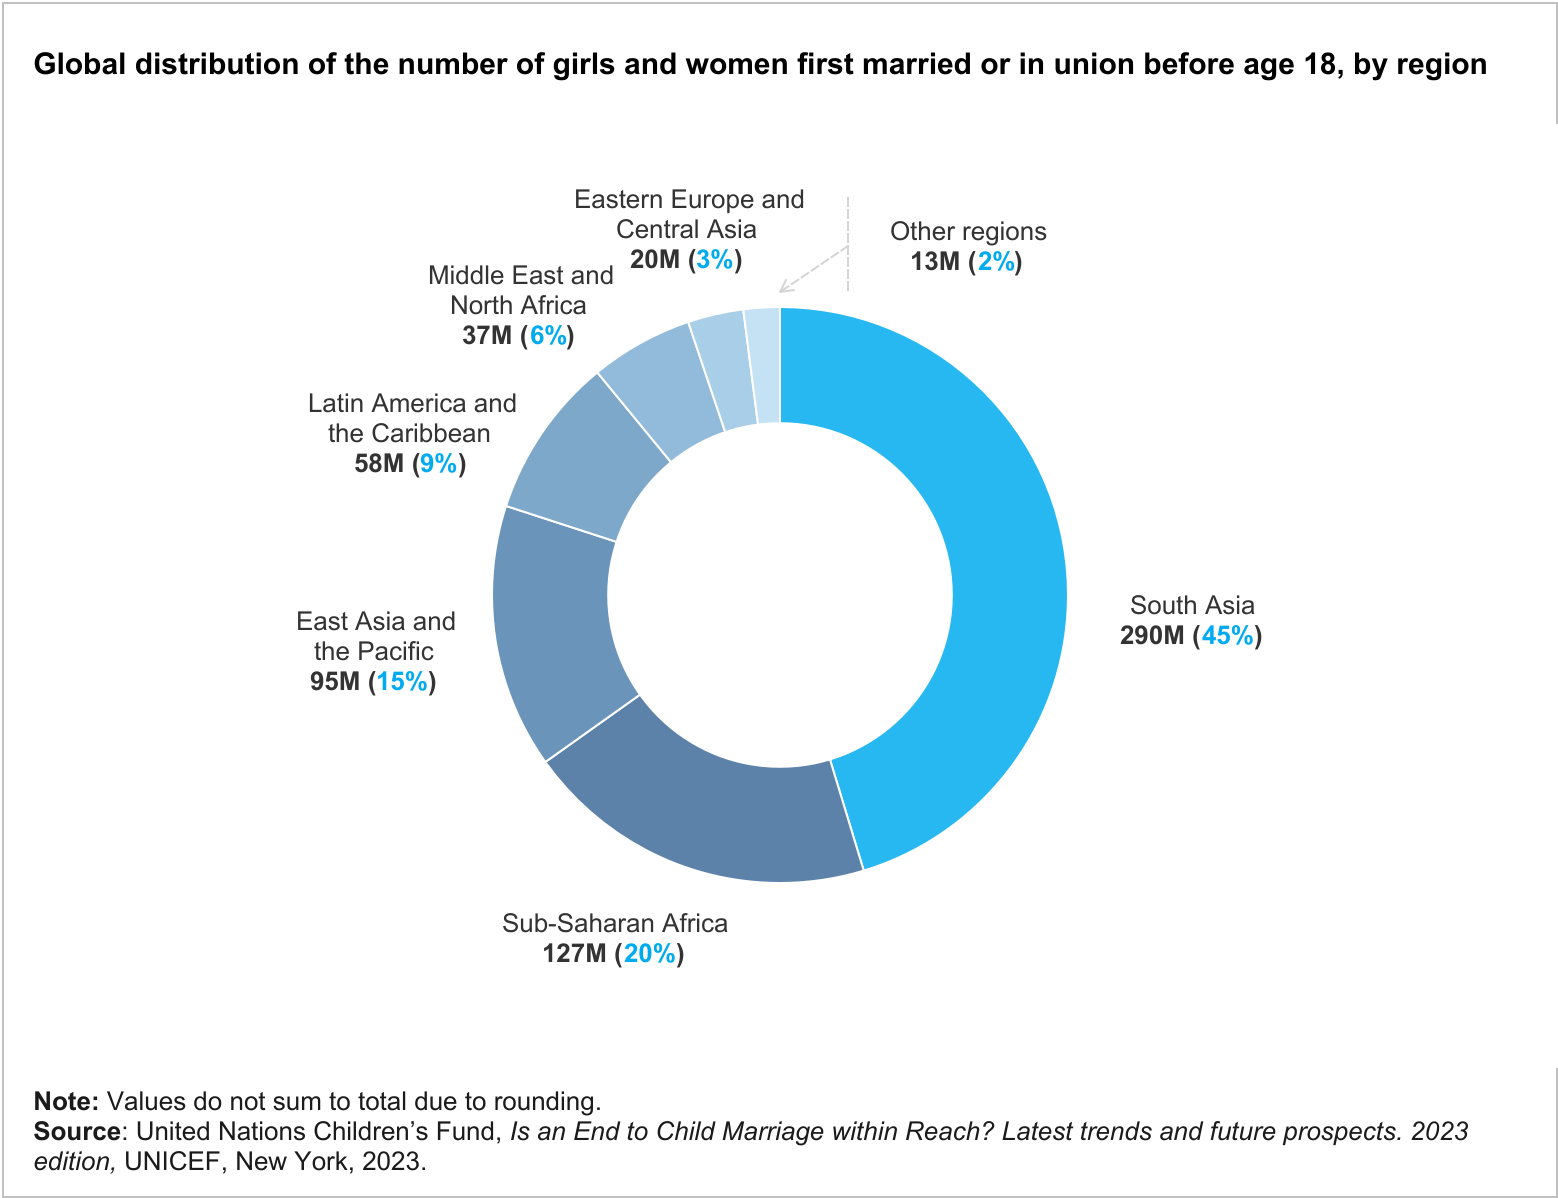 Graph depicting the global distribution of the number of girls and women first married before the age of 18